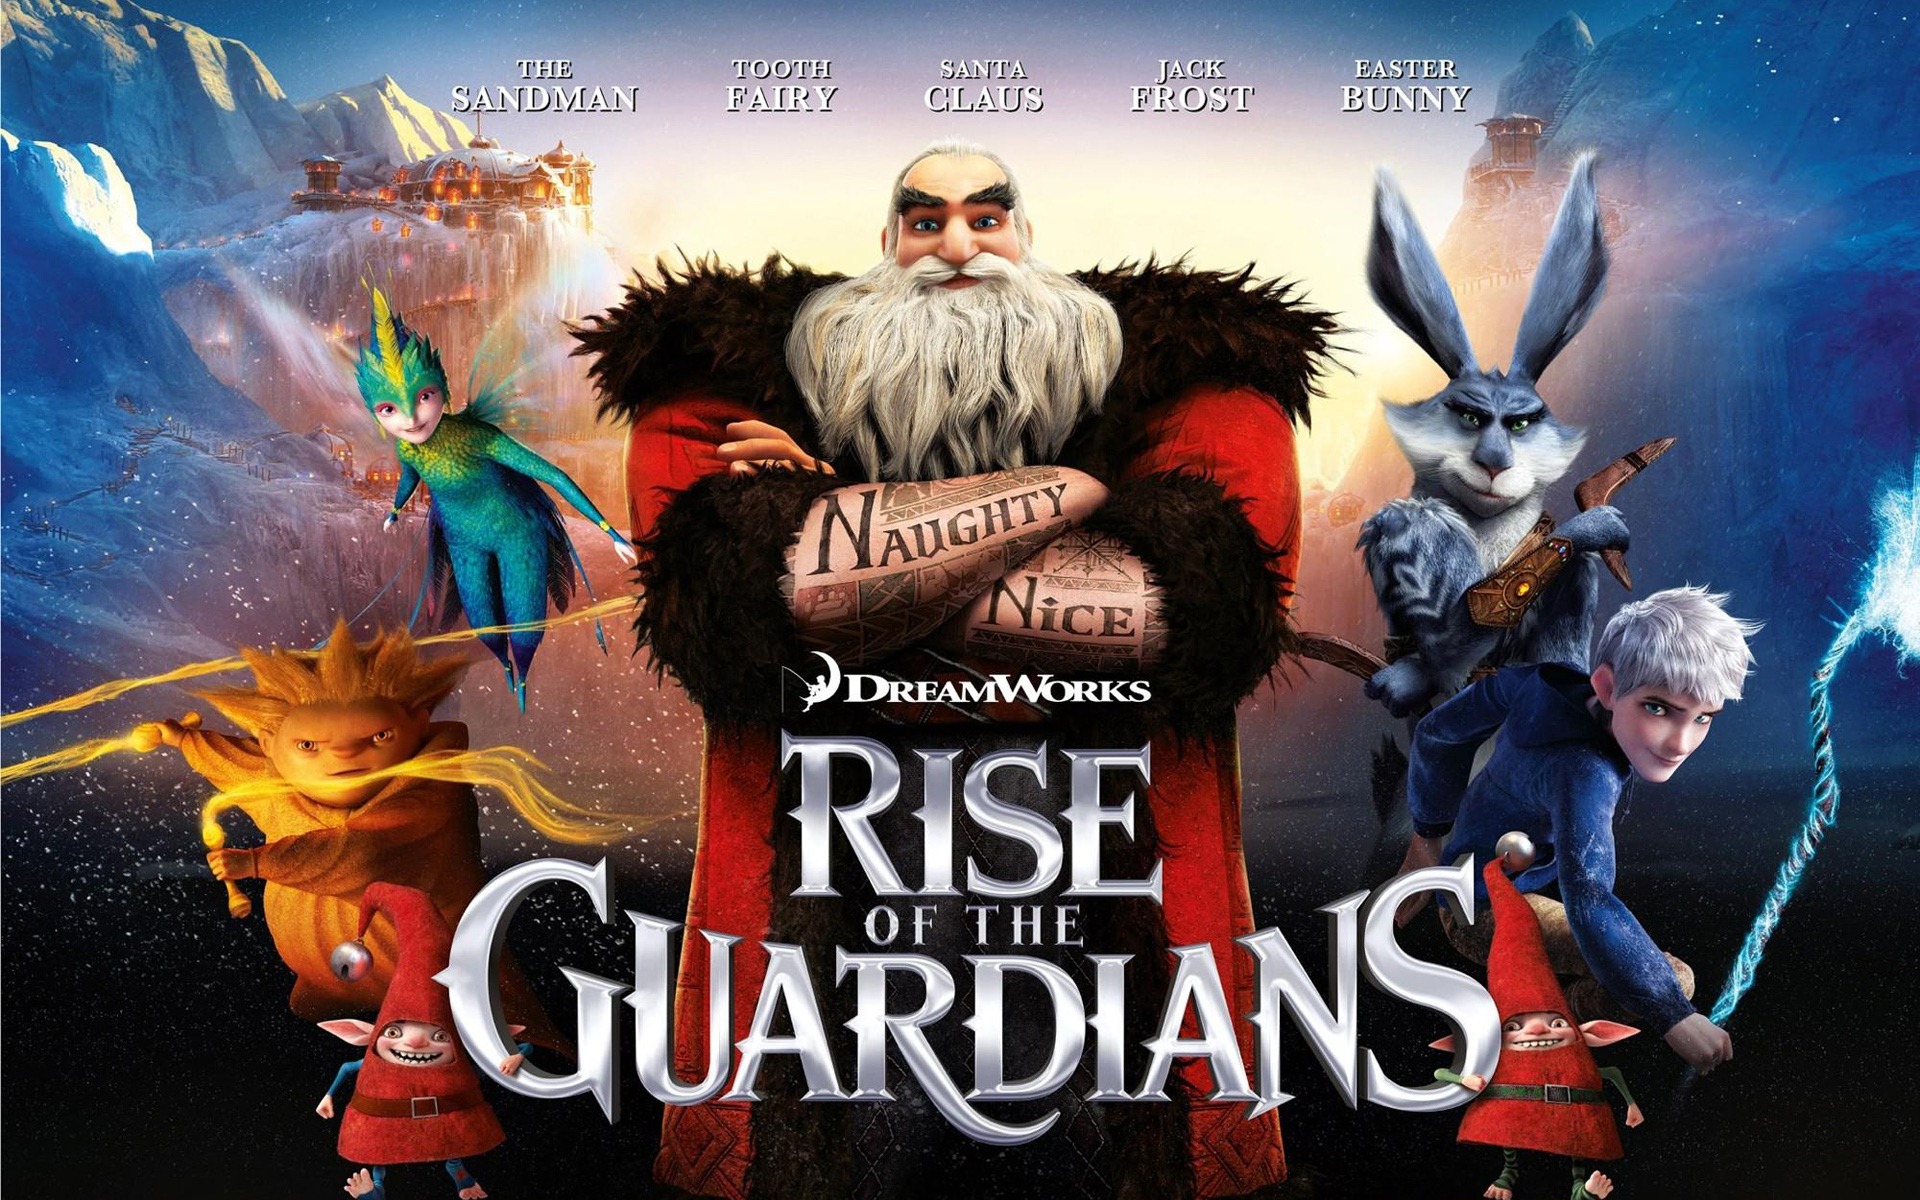 Rise of the Guardians 守護者聯盟 高清壁紙 #11 - 1920x1200